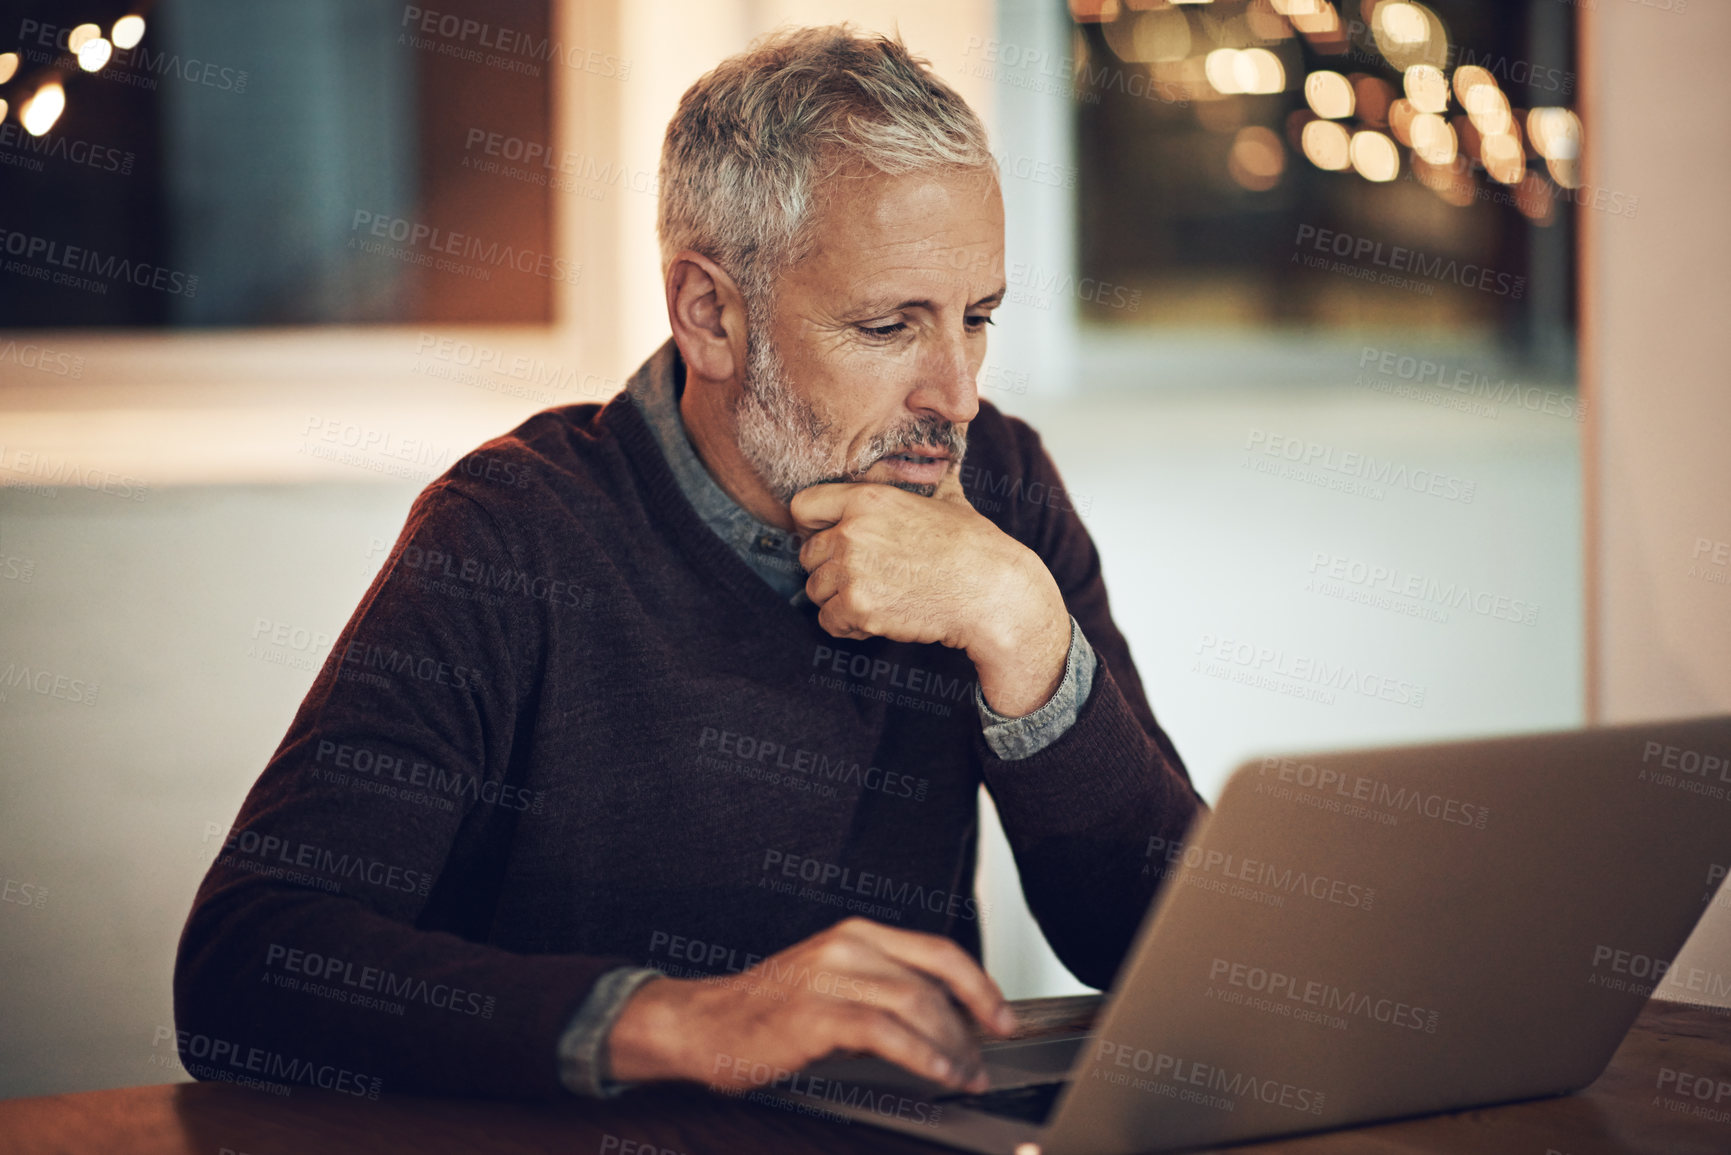 Buy stock photo Cropped shot of a mature businessman working late at the office